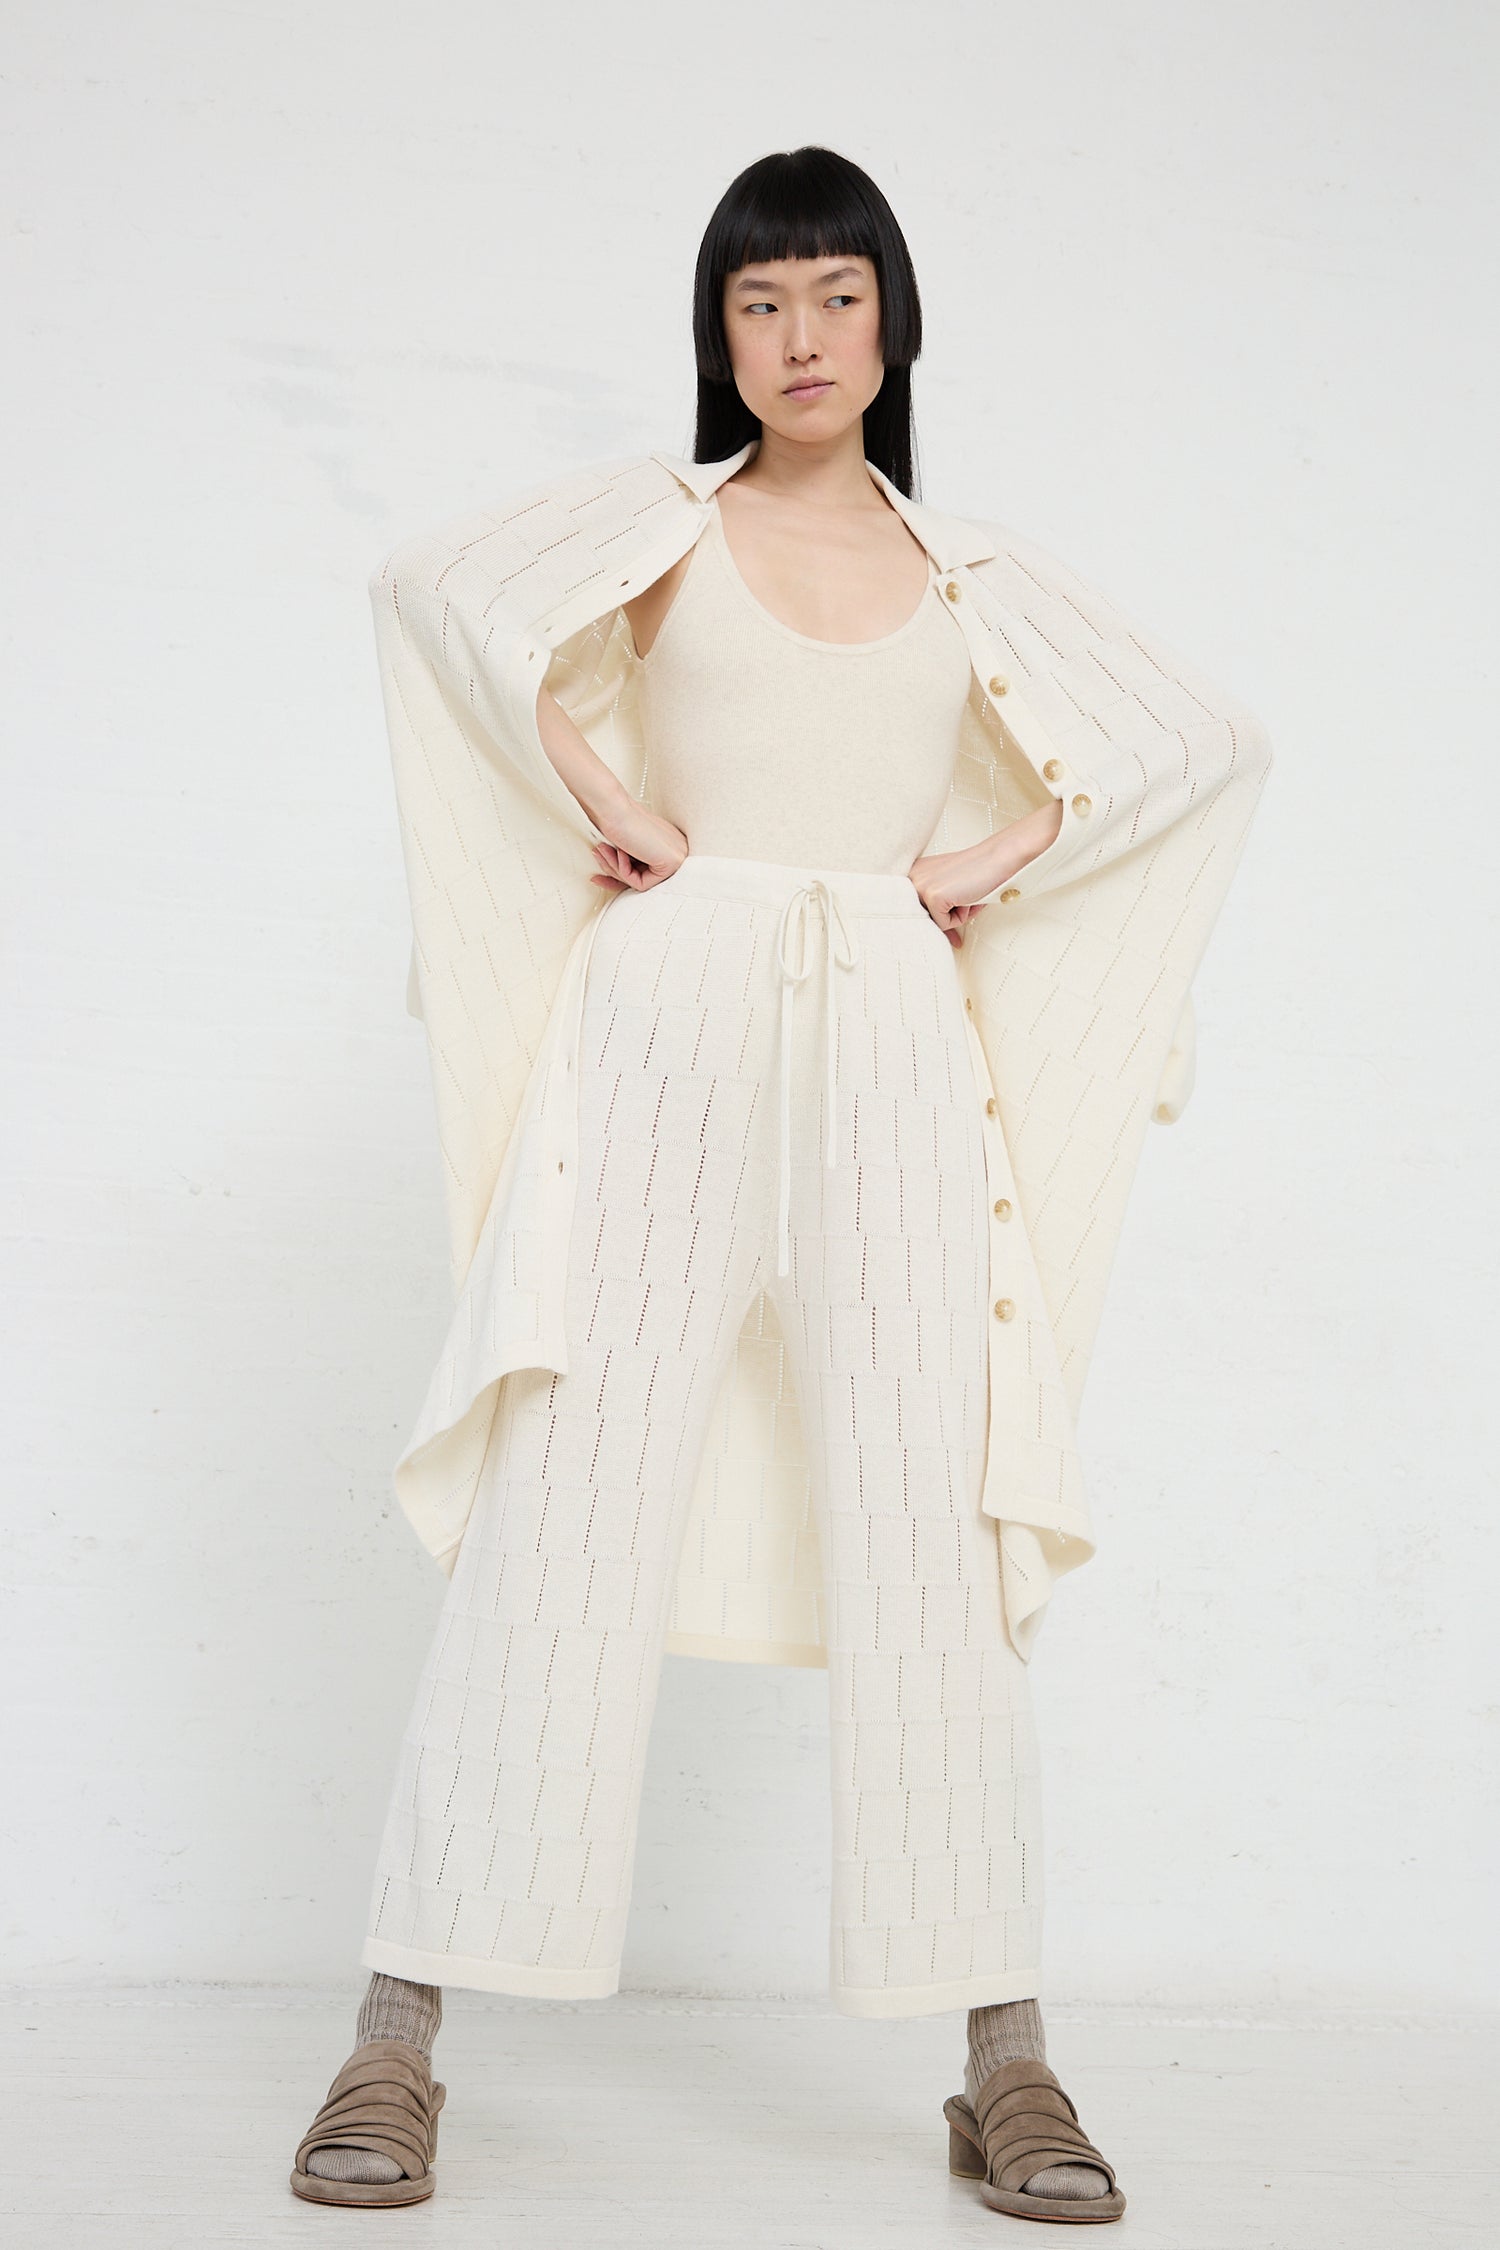 Woman in a cream-colored ensemble with trousers made from Lauren Manoogian's Lattice Pant in Bone, a sustainable pima cotton linen blend, and an open long jacket, posing with hands on hips against a white backdrop.